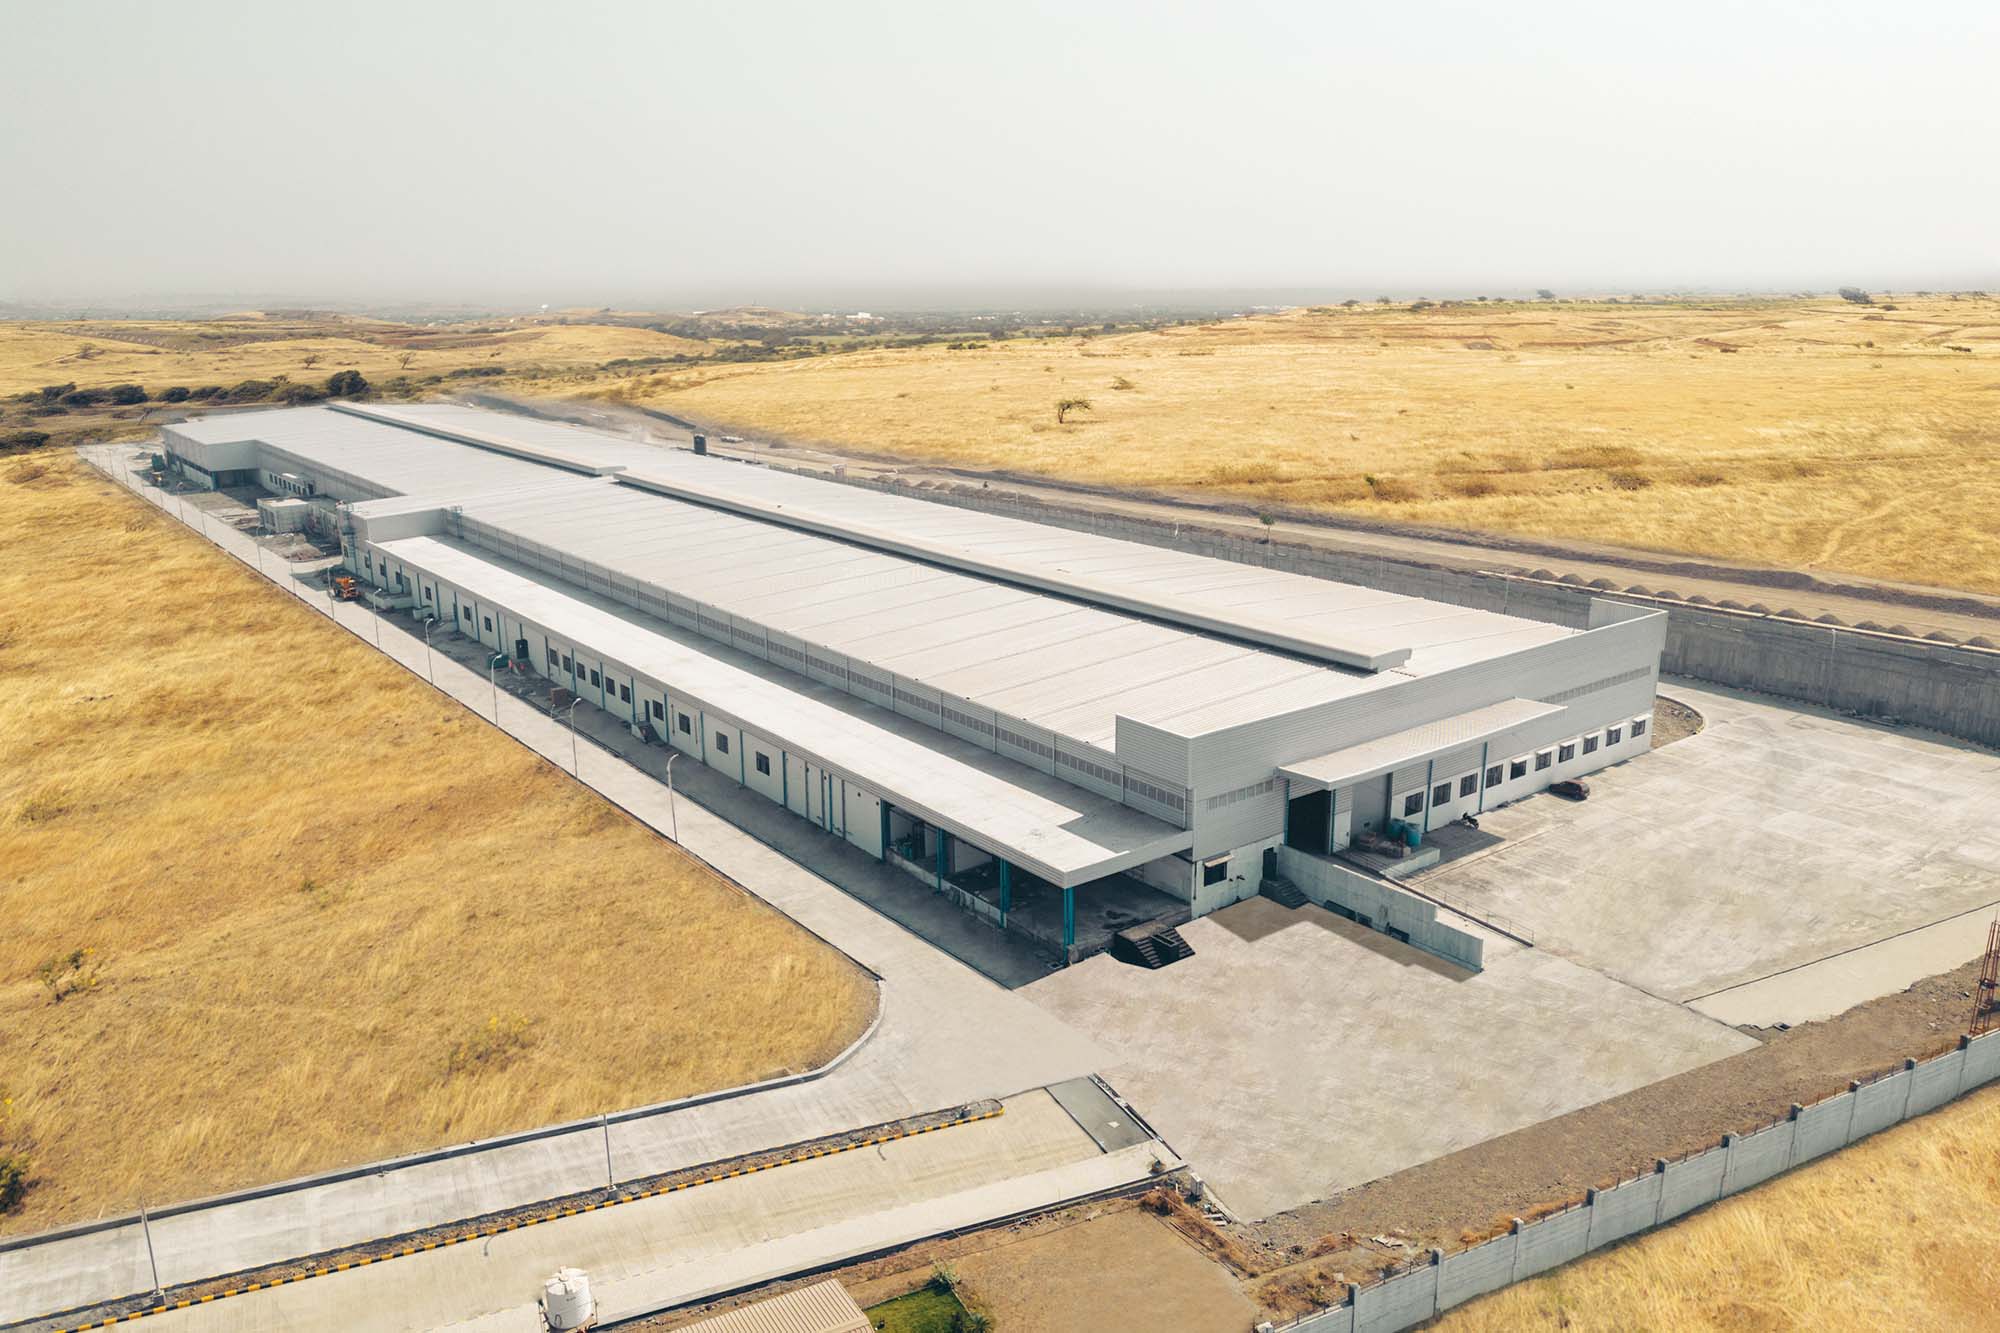 IFB Refrigeration manufacturing facility built by Everest